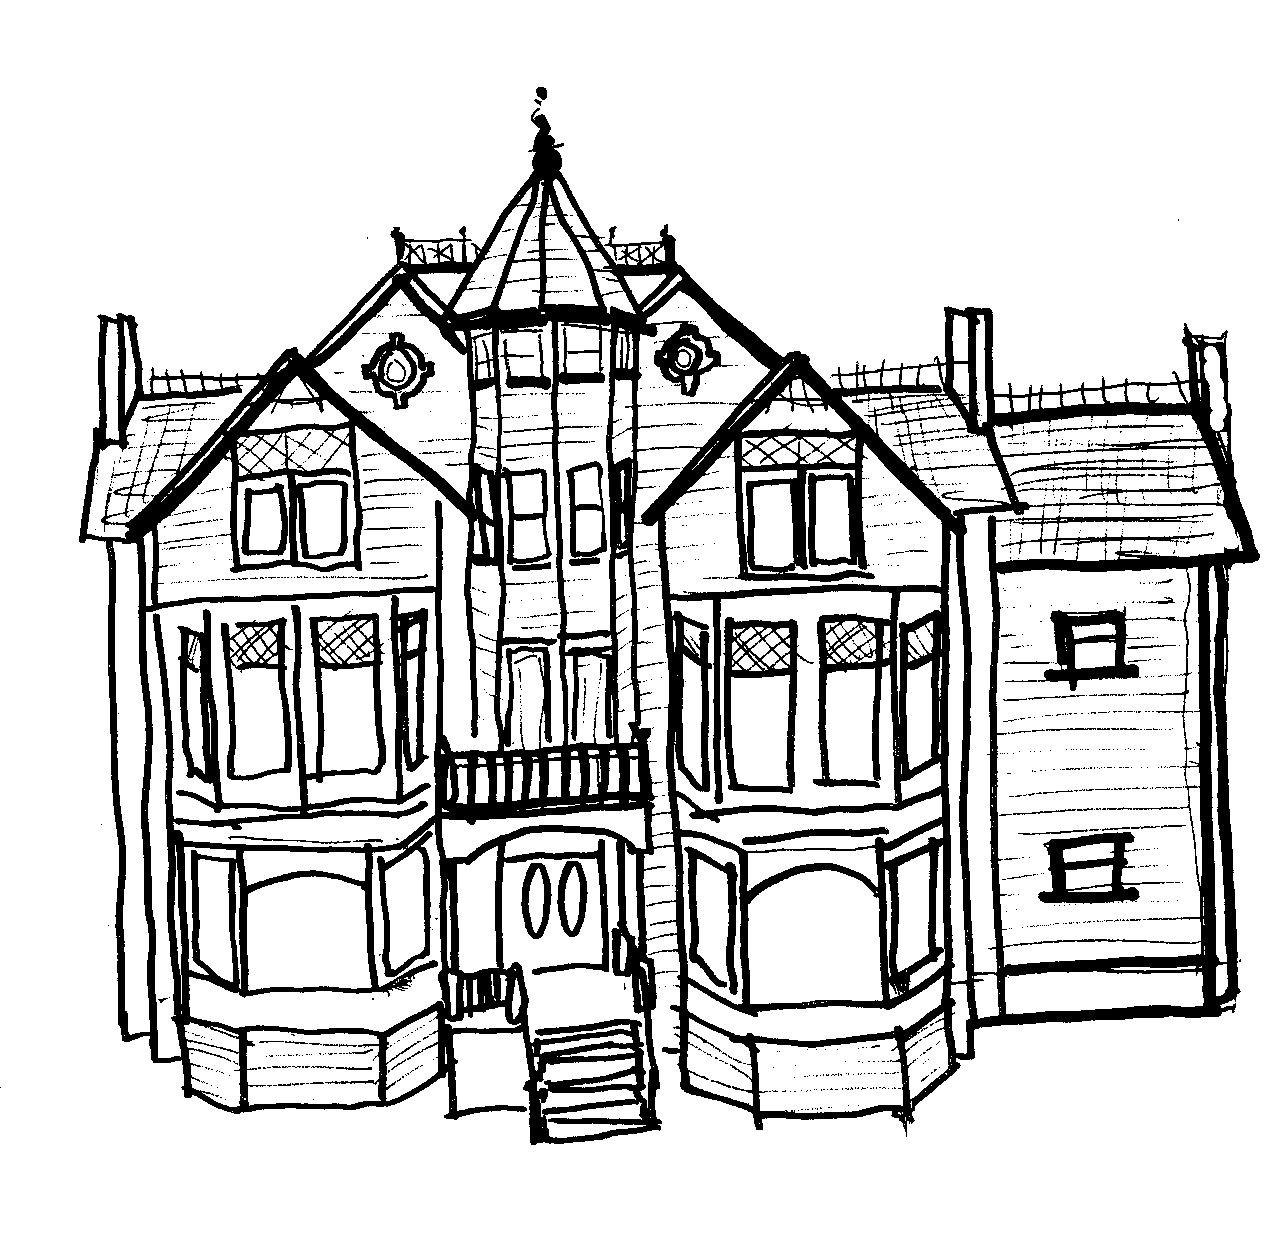 Mansion Coloring Pages